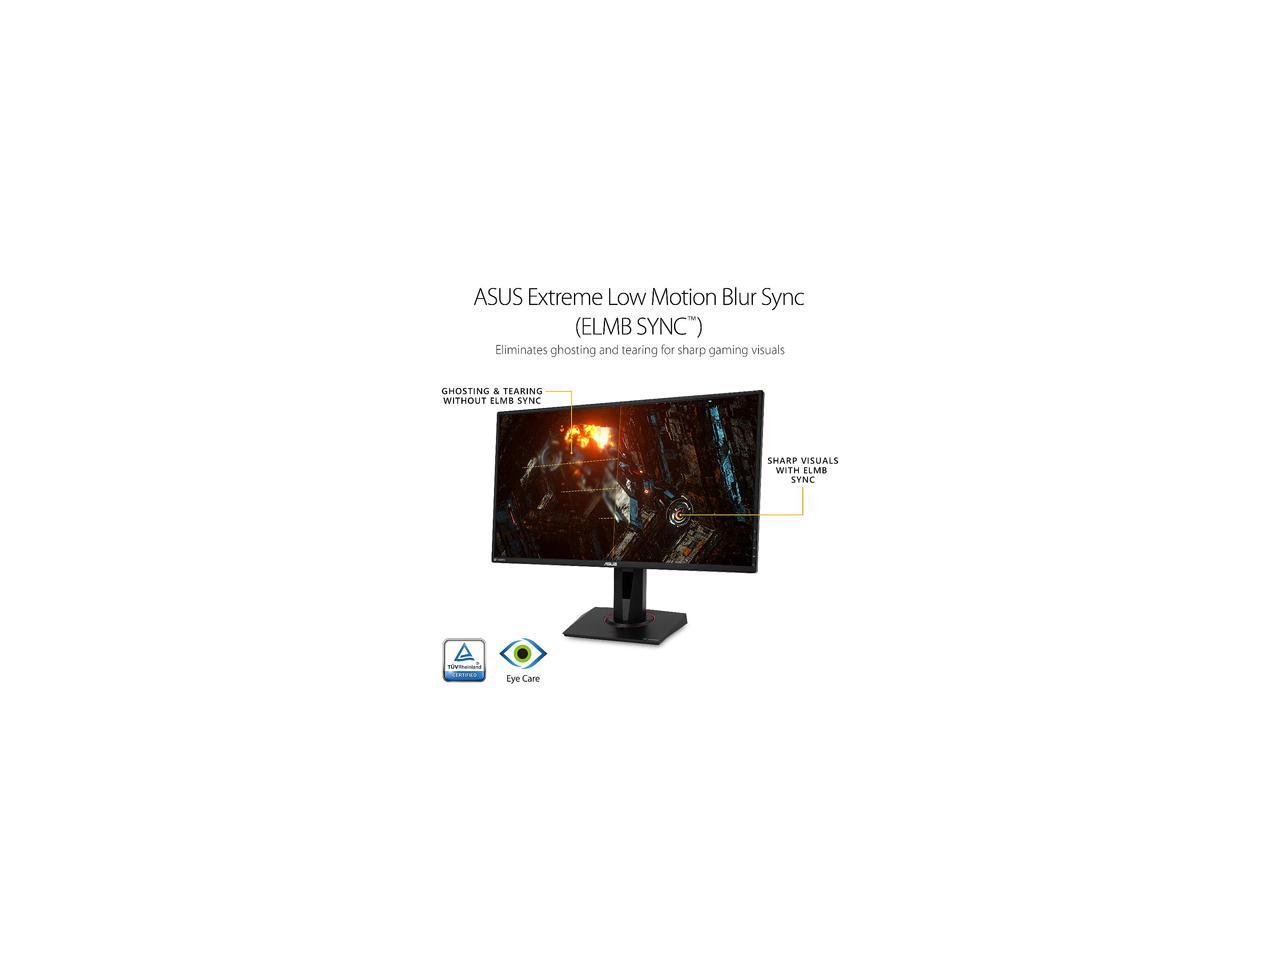 ASUS TUF Gaming VG27AQ 27" 2560 x 1440 WQHD 2K Resolution 165Hz 1ms 2xHDMI DisplayPort Adaptive-Sync G-SYNC Compatible Asus Eye Care with Ultra Low-Blue Light & Flicker-Free IPS HDR10 Gaming Monitor